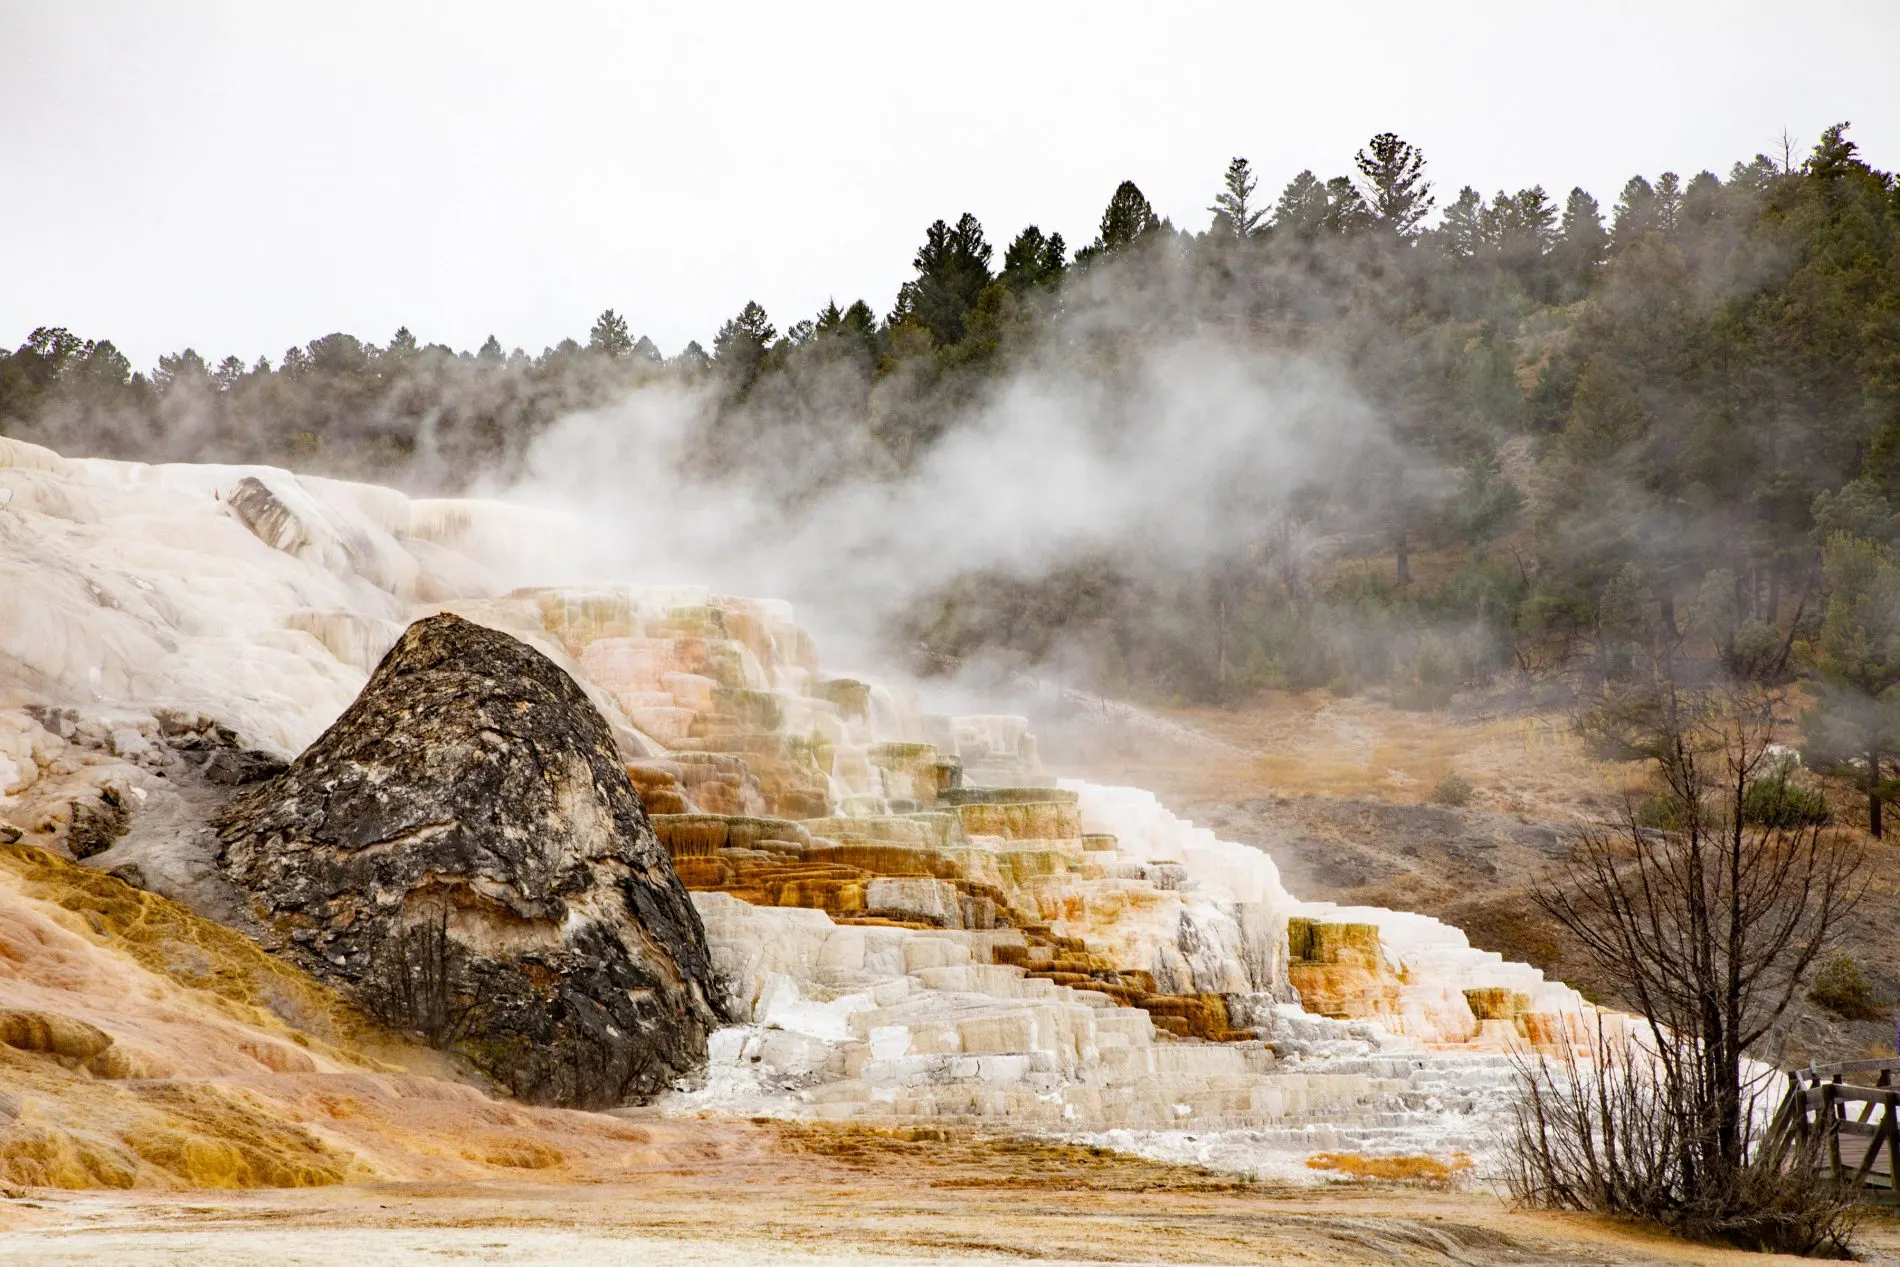 Steam rising from Yellowstone Hot Springs at Mammoth Terraces.